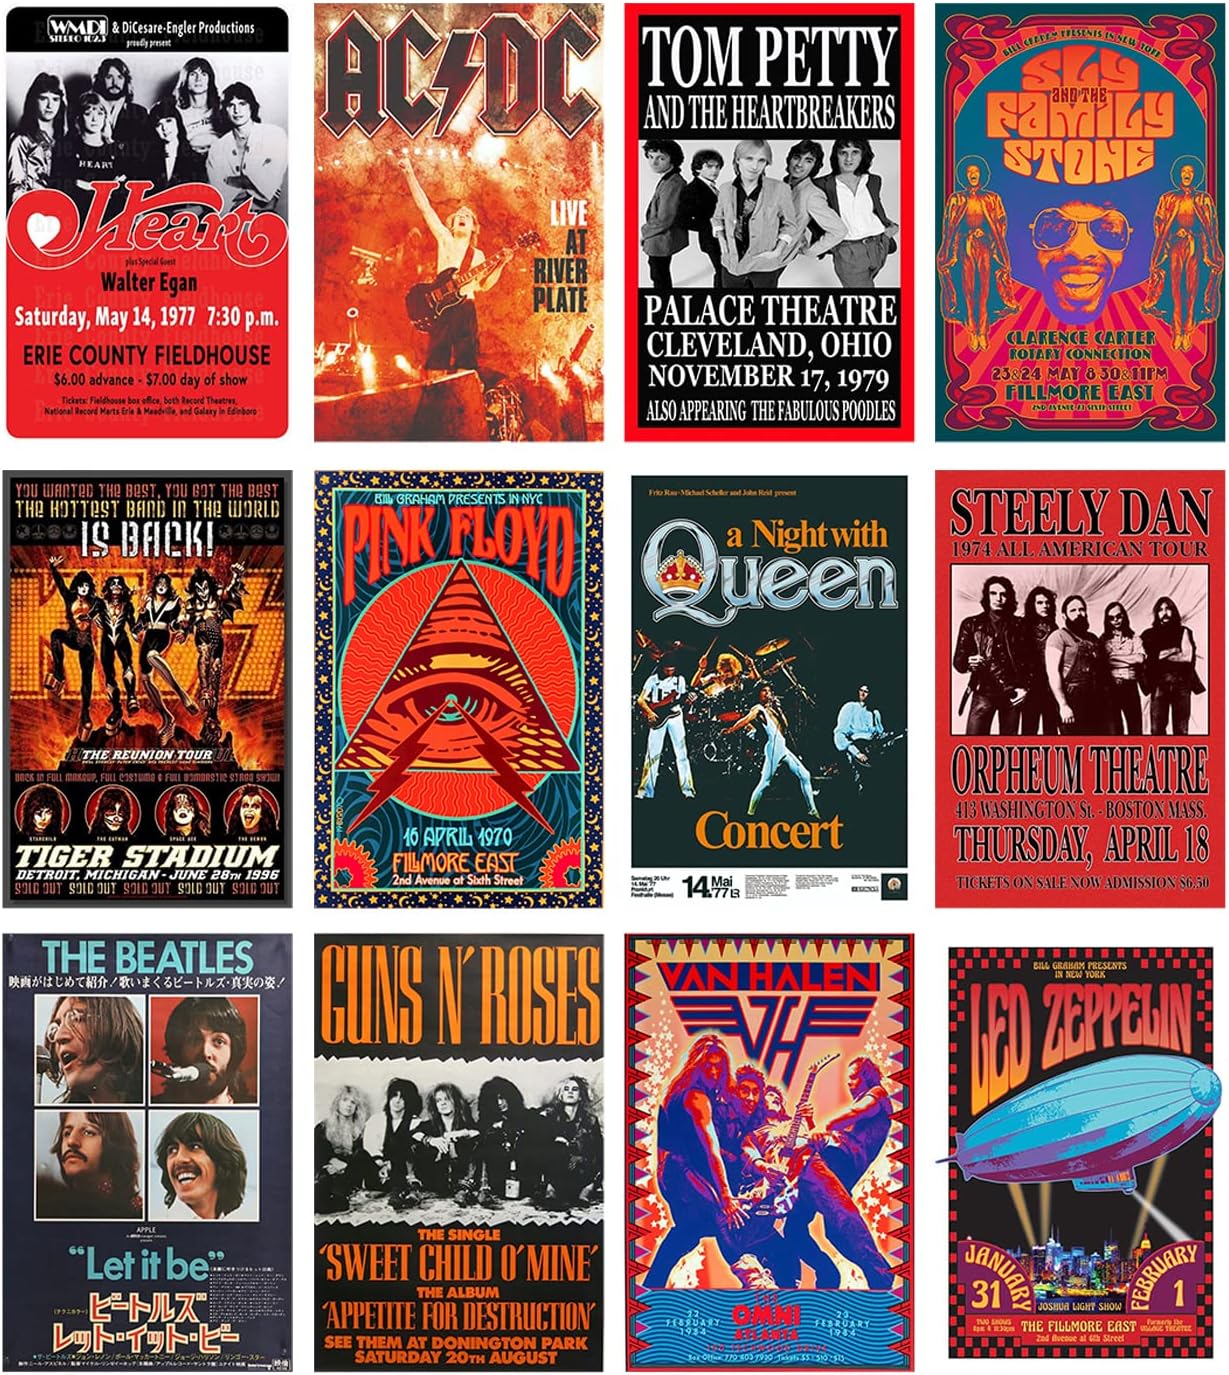 Woonkit Vintage Rock Band Posters for Room Aesthetic, 70s 80s 90s Retro Bedroom Decor Wall Art, Concert Poster Collage, Old Music Album Cover Prints (12 SET B, 7.8X11.8 INCH)